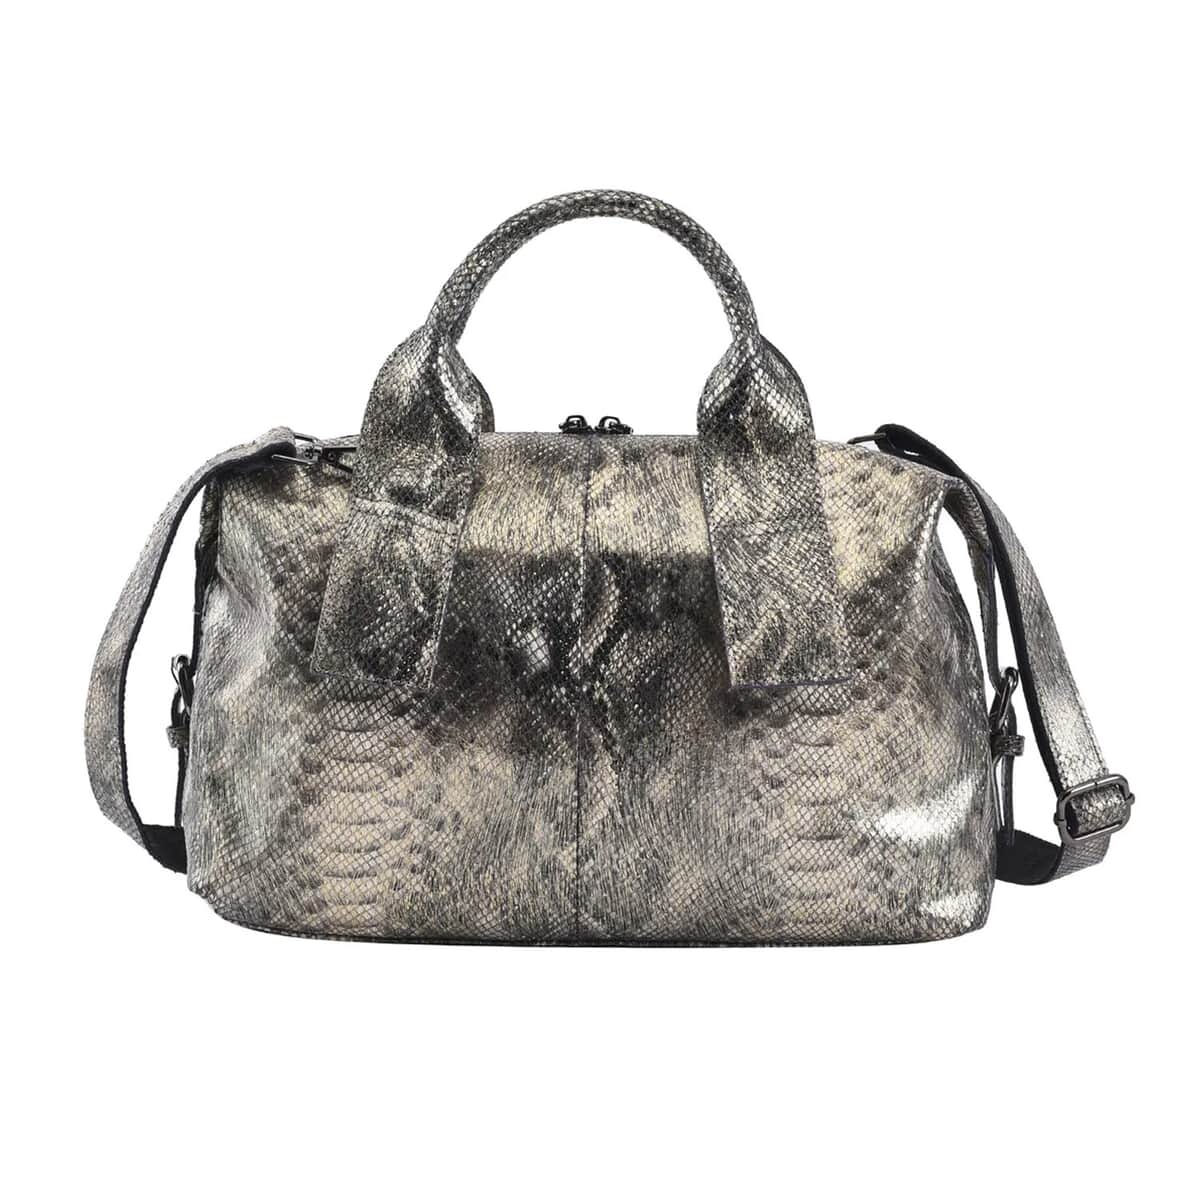 Gold and Black Snake Print Genuine Leather Hobo Bag (16.5"x5.12"x14.17") with 47" Detachable Shoulder Strap and 6" Handle Drop image number 0